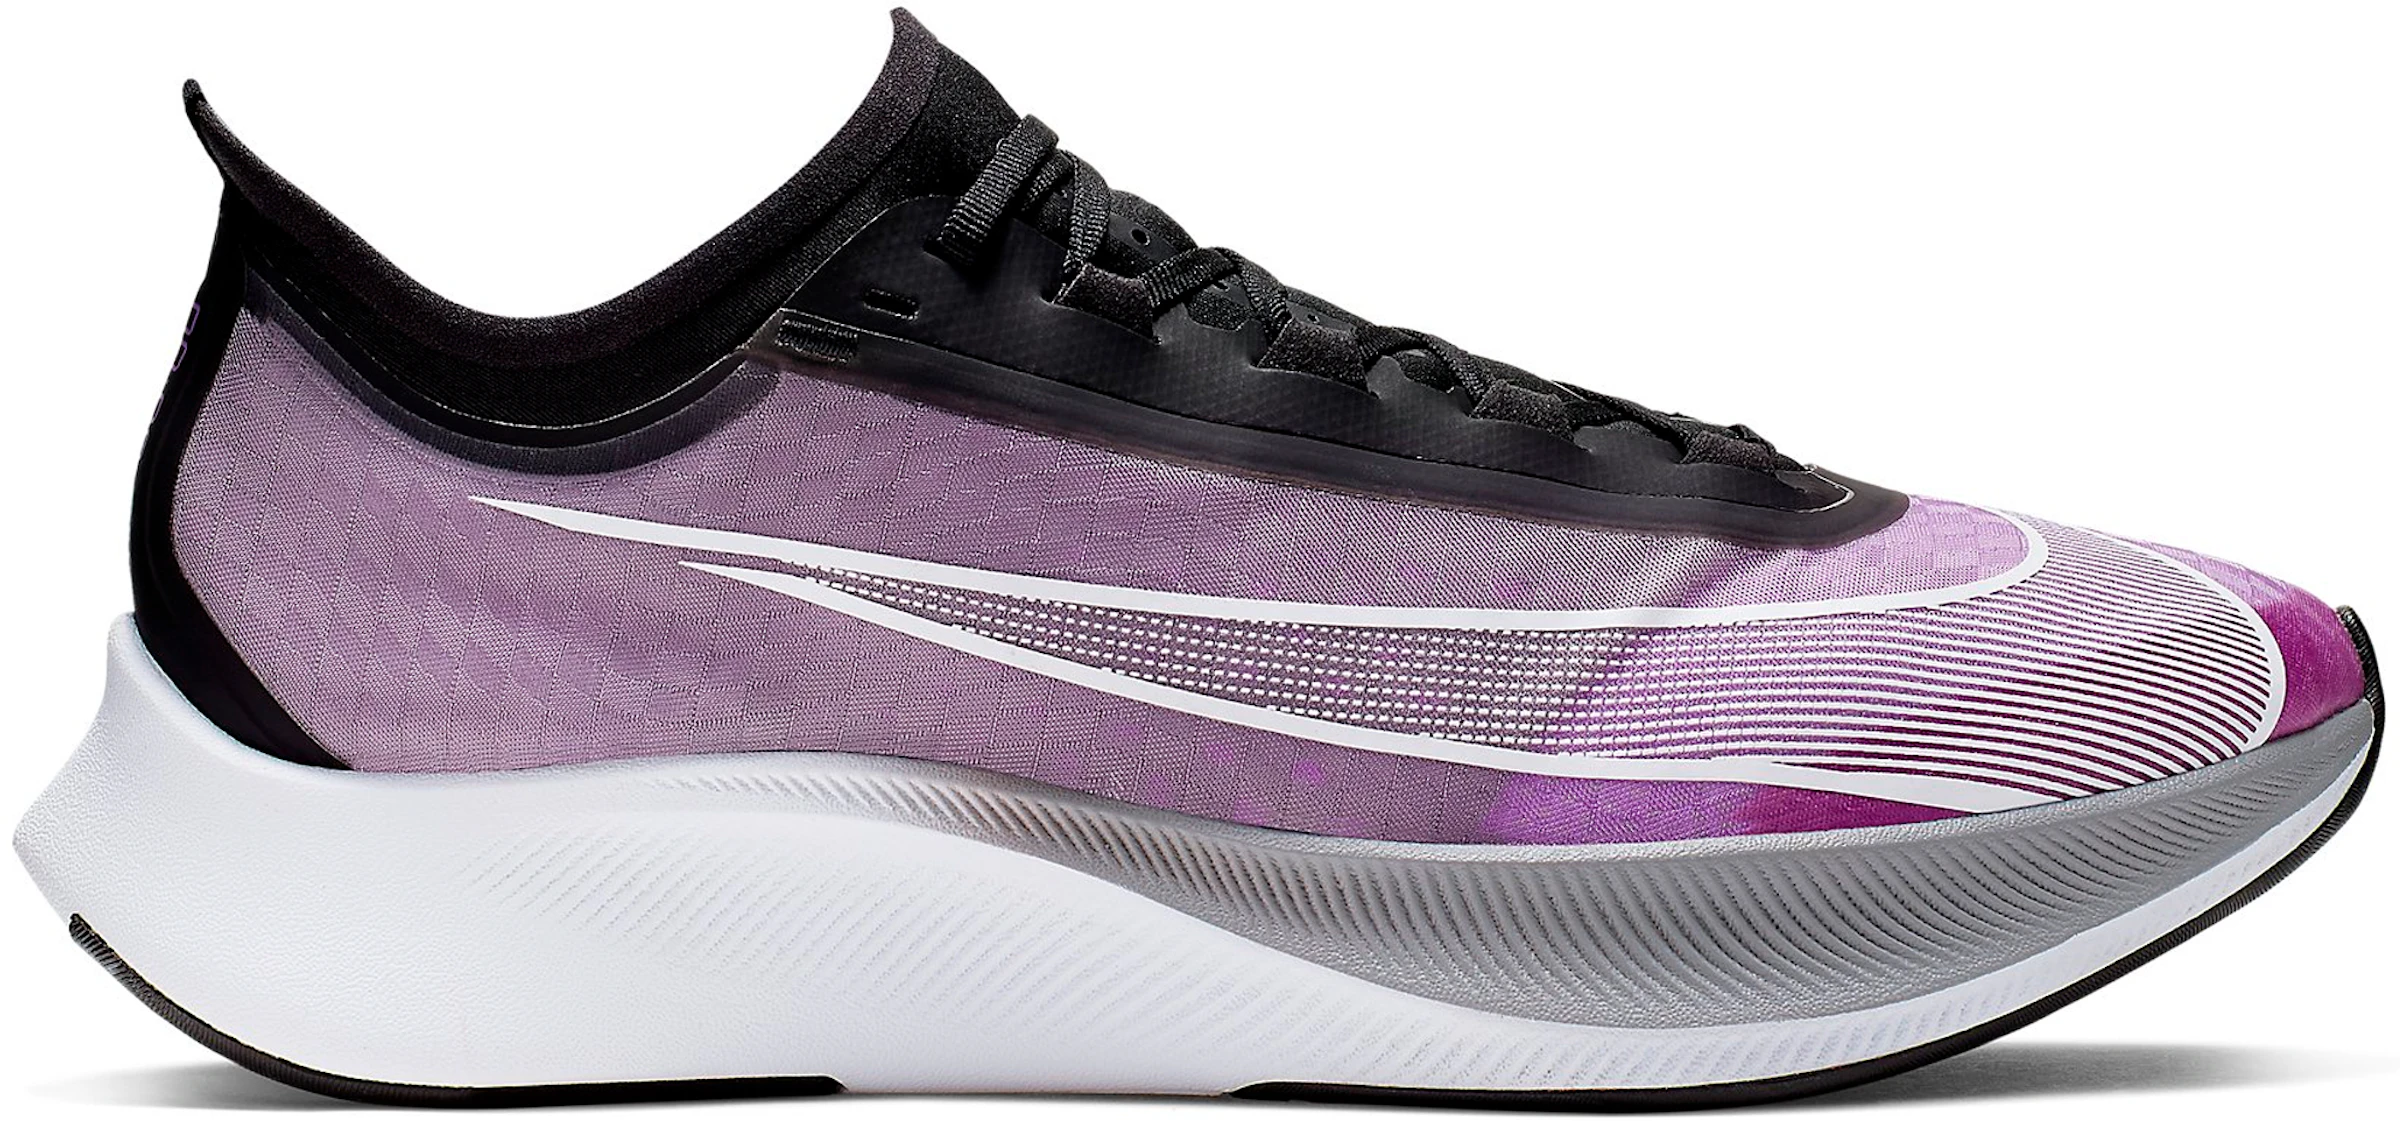 Nike Zoom Fly 3 Hyper - AT8240-500 - US